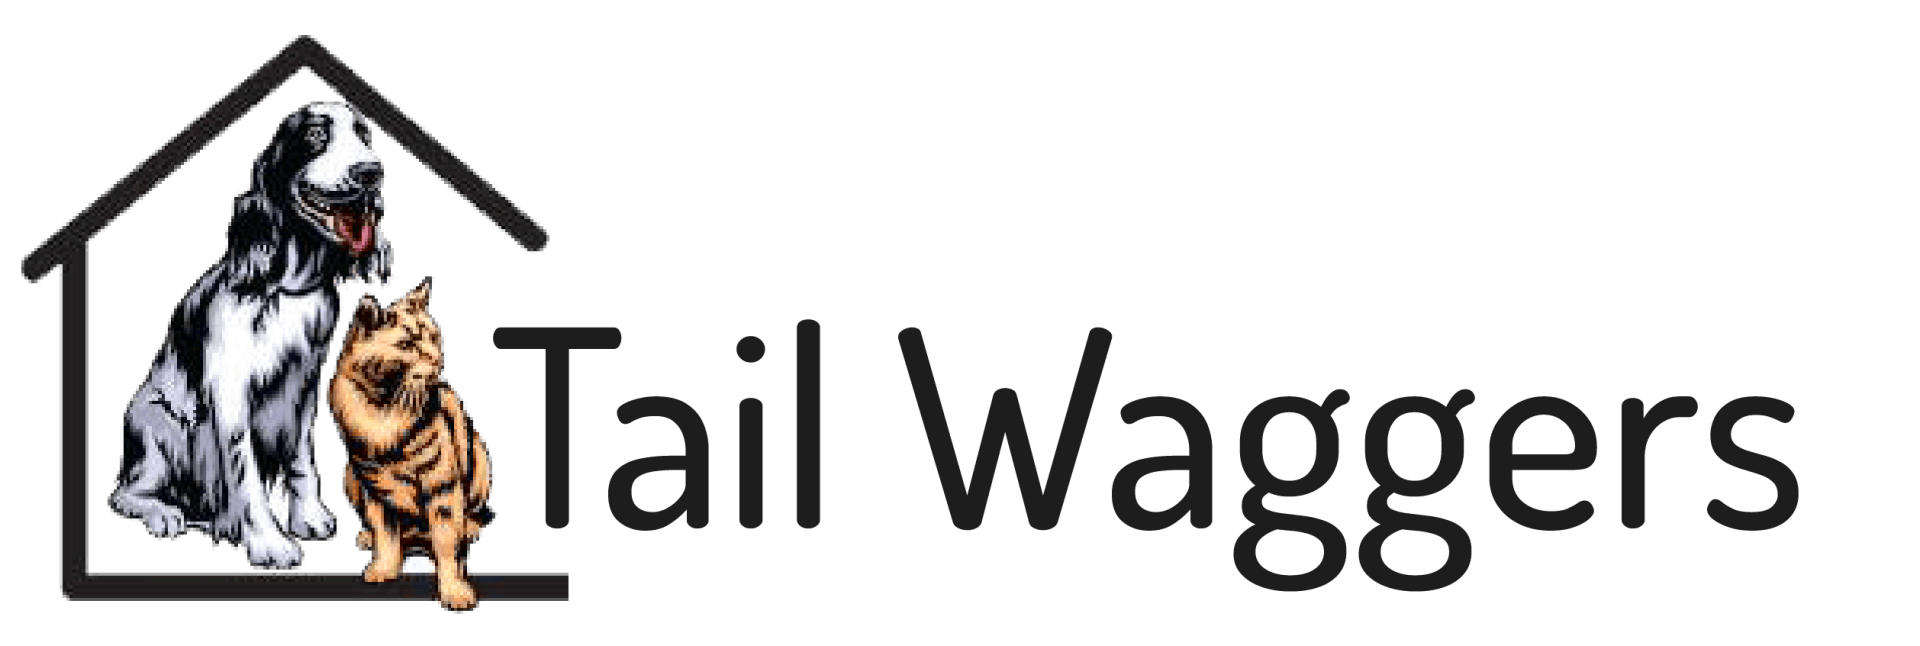 Tail Waggers logo